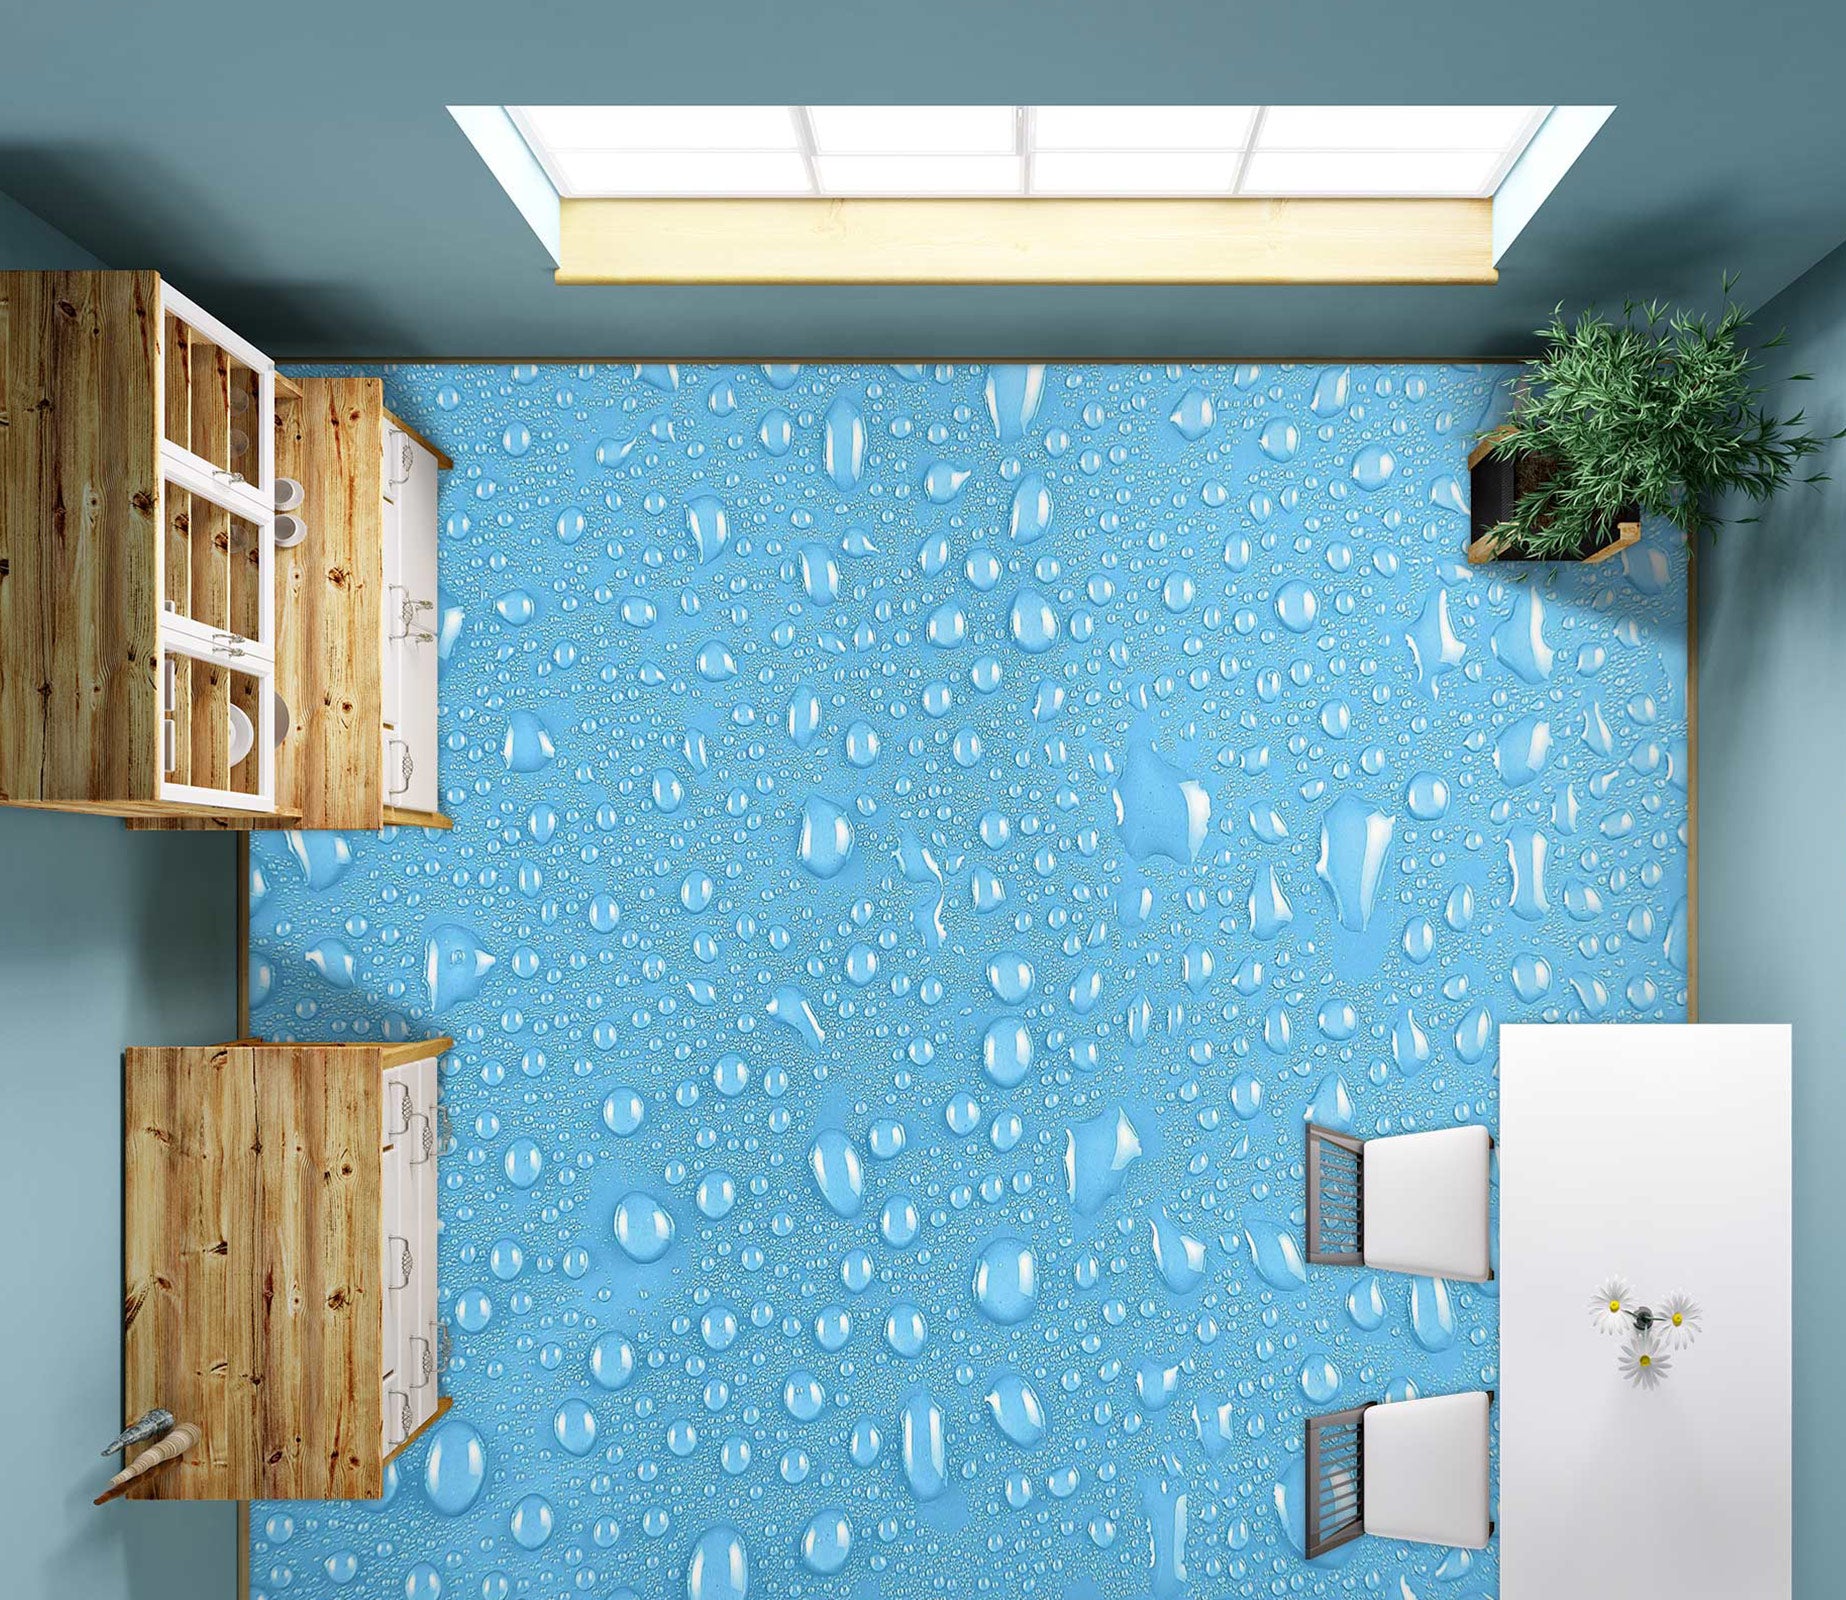 3D Quiet Blue And Water Drops 1388 Floor Mural  Wallpaper Murals Self-Adhesive Removable Print Epoxy